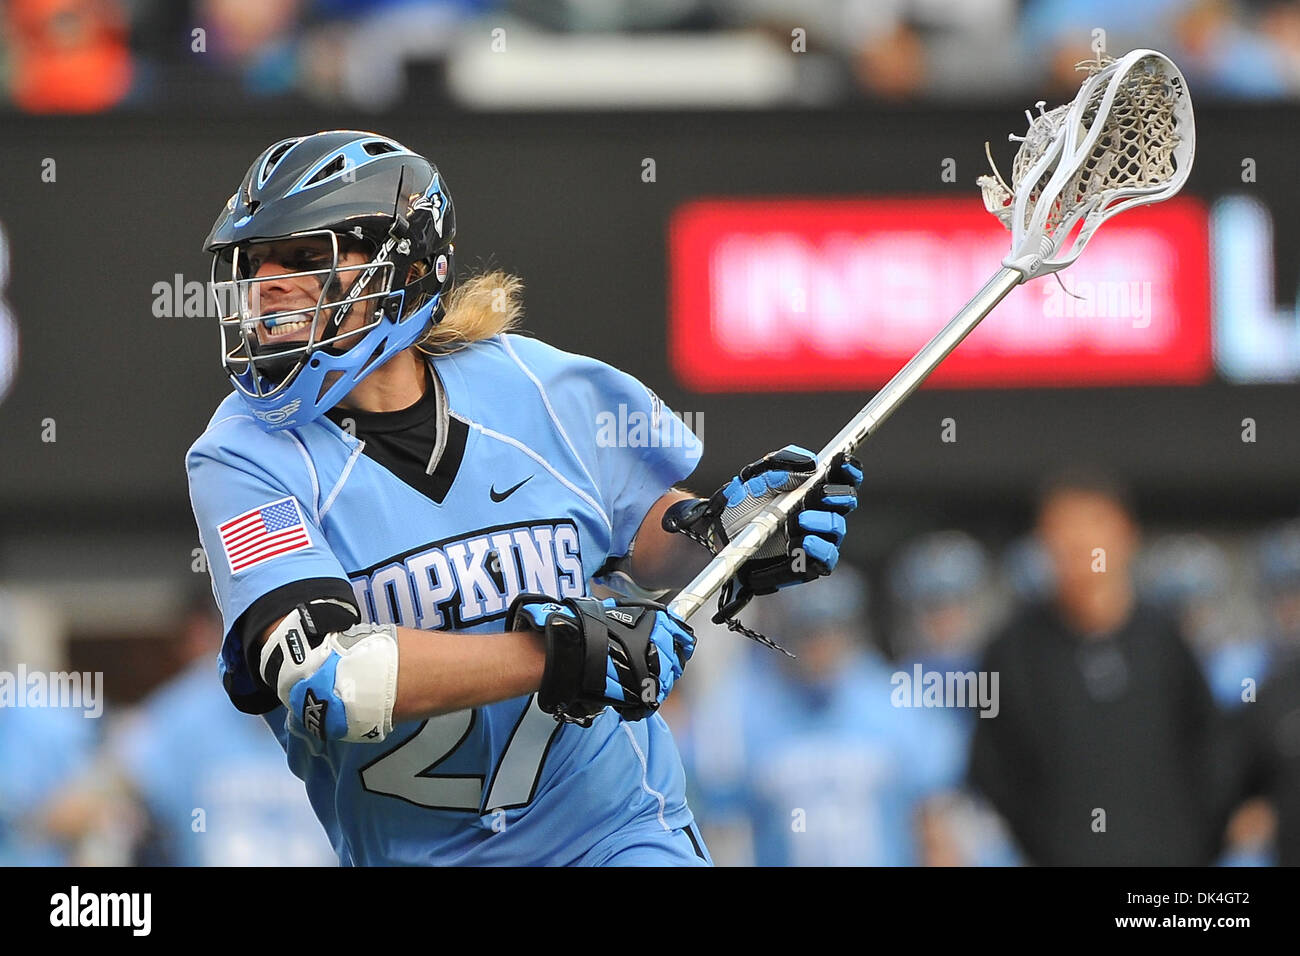 Apr. 3, 2011 - East Rutherford, New Jersey, U.S - Johns Hopkins Blue Jays Midfielder Rob Guida (27) in action during the Konica Minolta Big City Classic at The New Meadowlands Stadium in East Rutherford New Jersey Johns Hopkins defeats UNC 10 to 9 (Credit Image: © Brooks Von Arx/Southcreek Global/ZUMAPRESS.com) Stock Photo